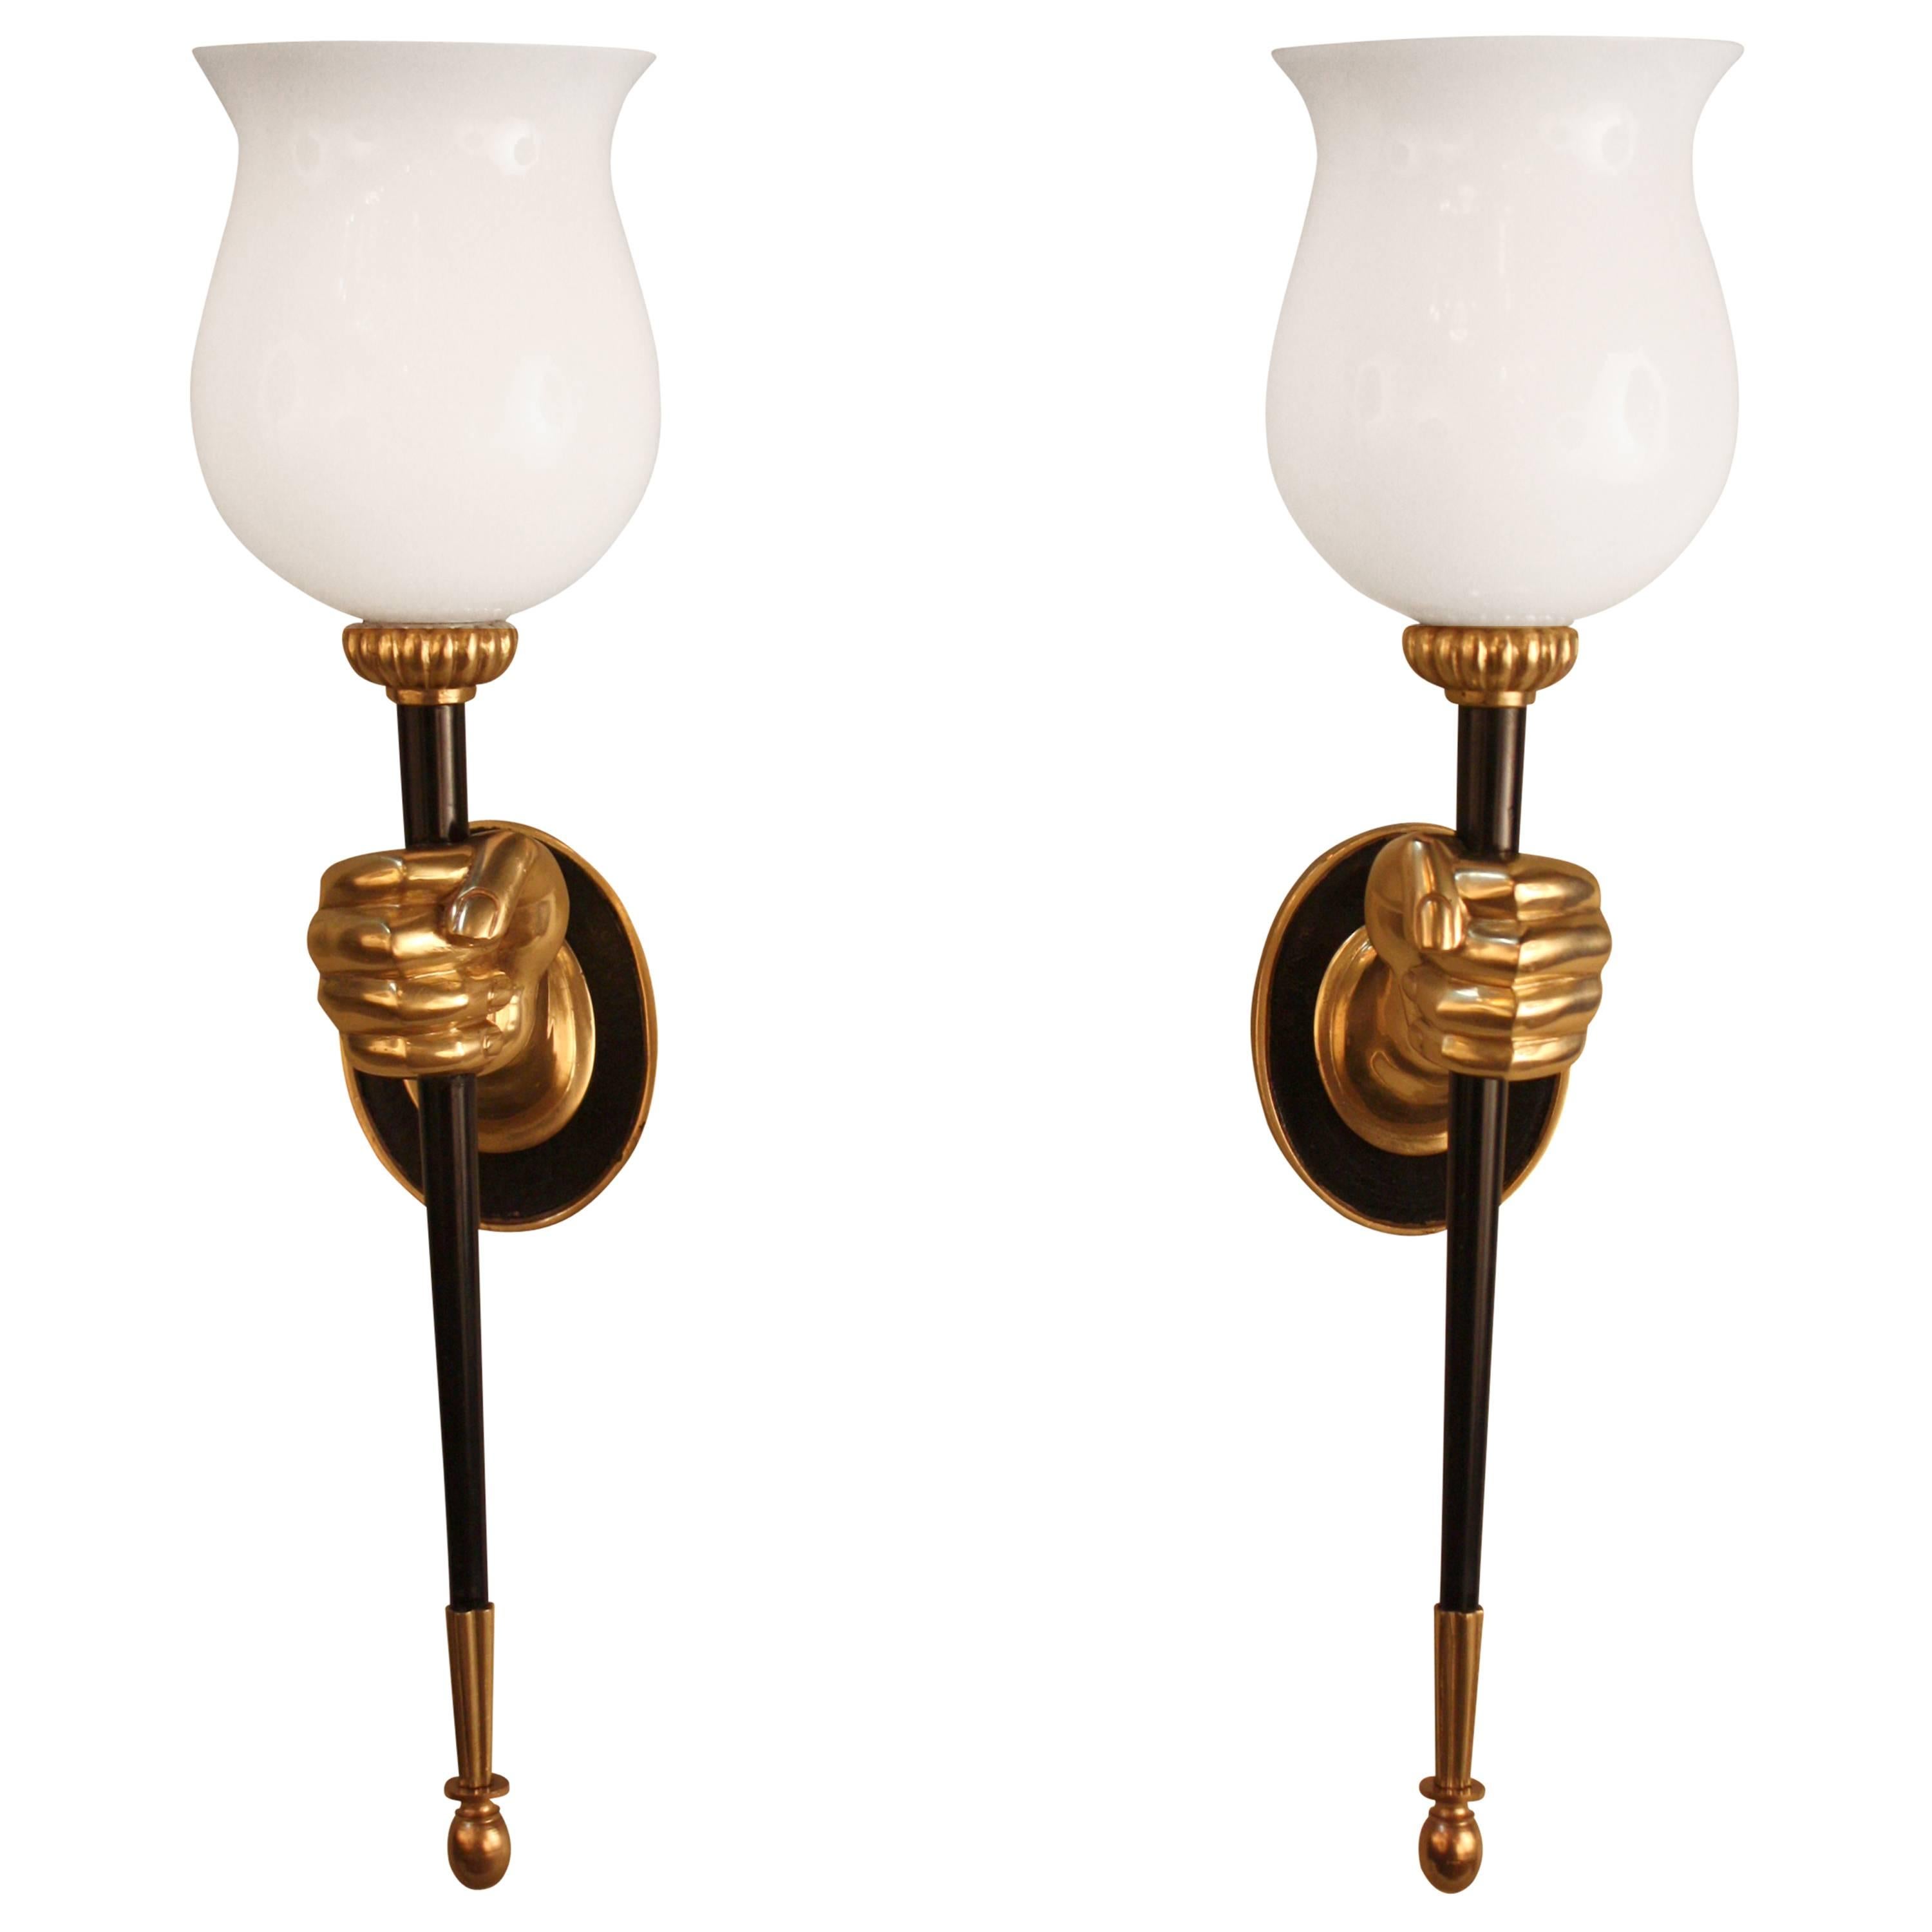 Pair of Bronze Torch Wall Sconces by Maison Jansen